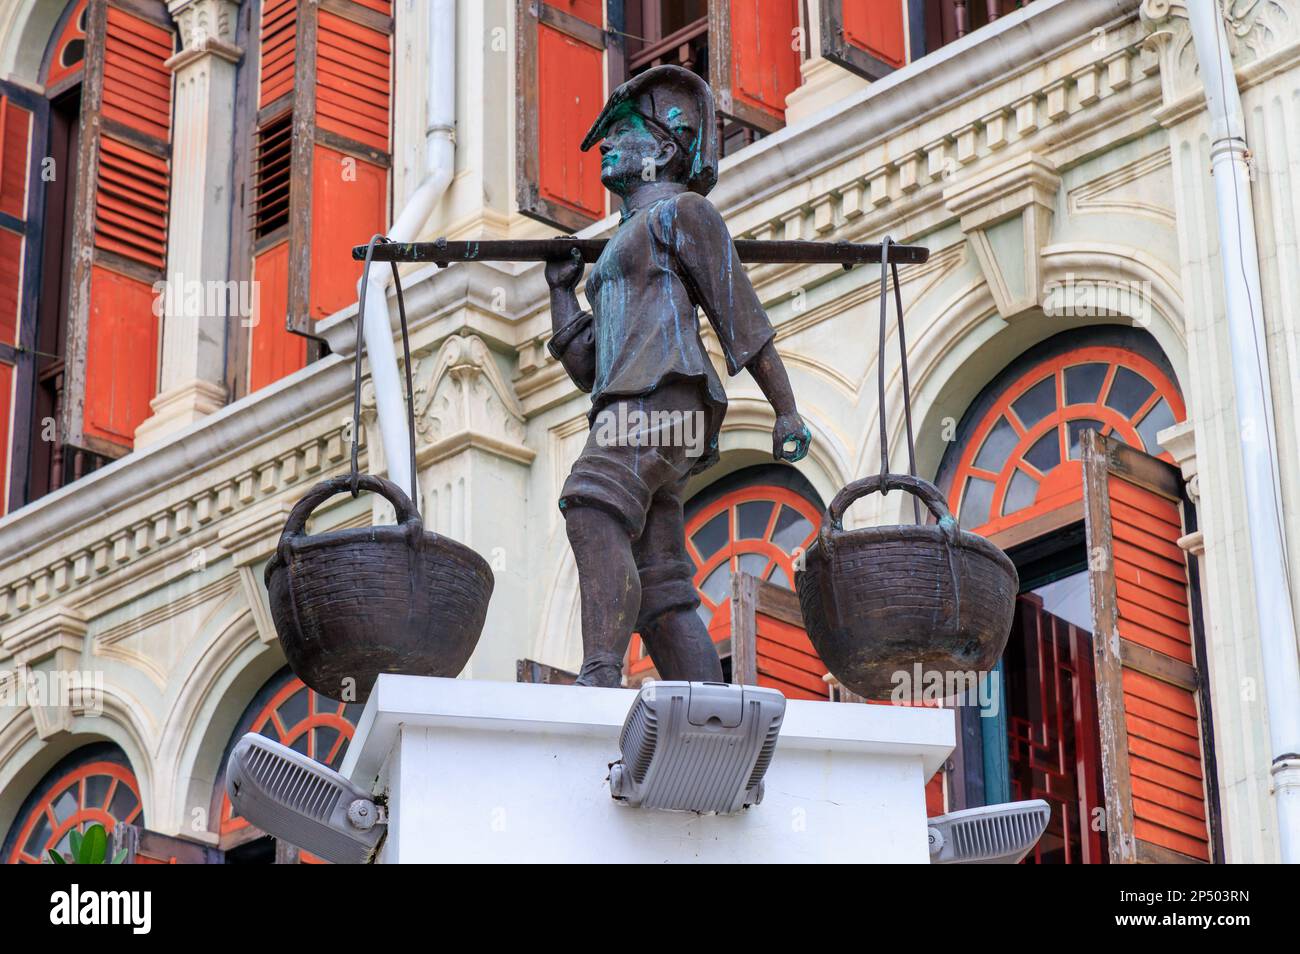 Bronze statue of a fisherman carrying baskets on shoulder pole in Smith Street, Chinatown, Singapore Stock Photo